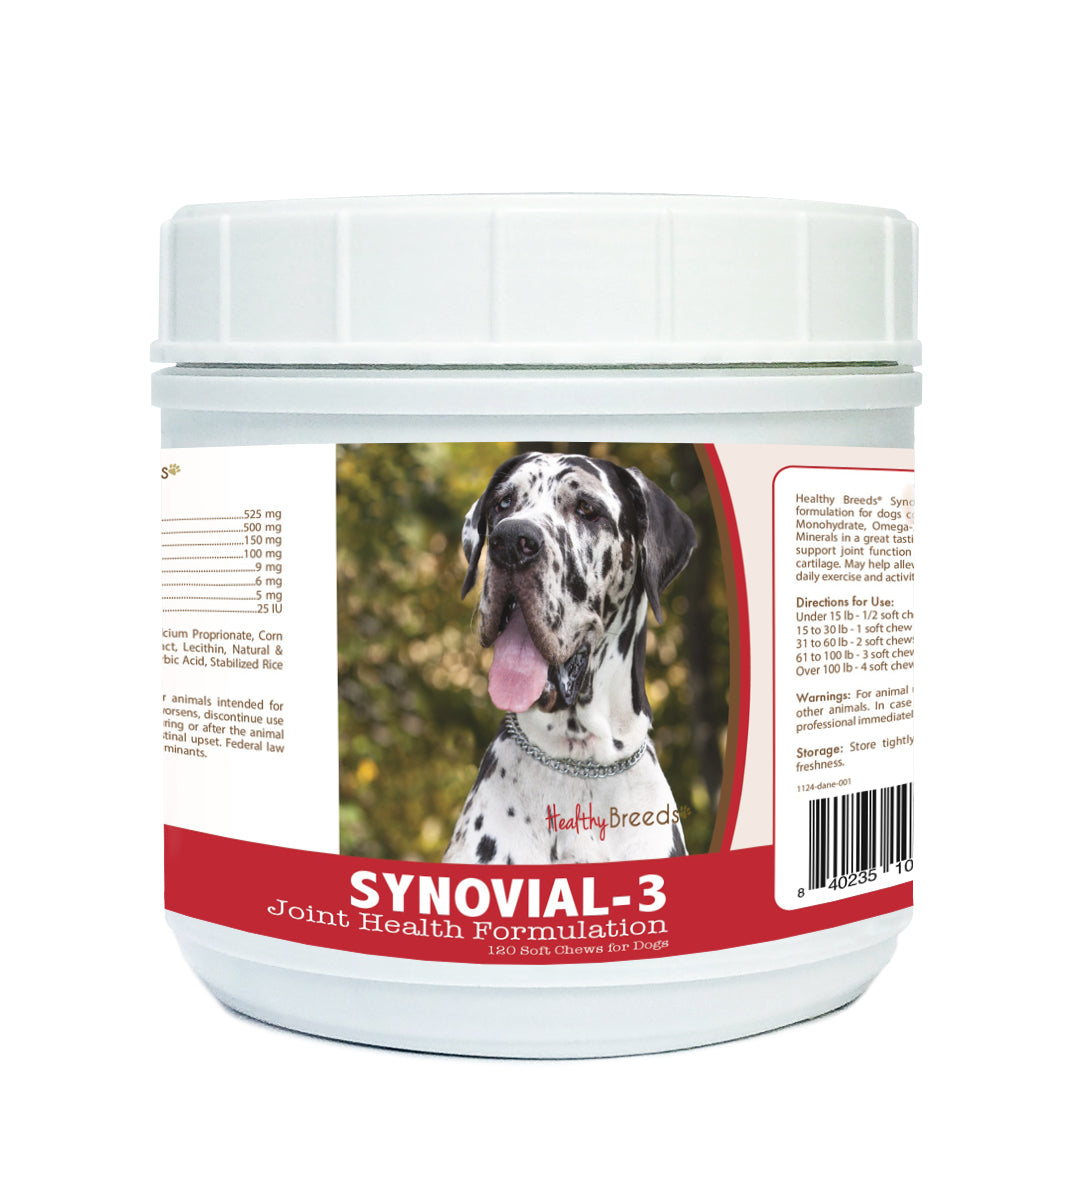 Great Dane Synovial-3 Joint Health Formulation Soft Chews 120 Count